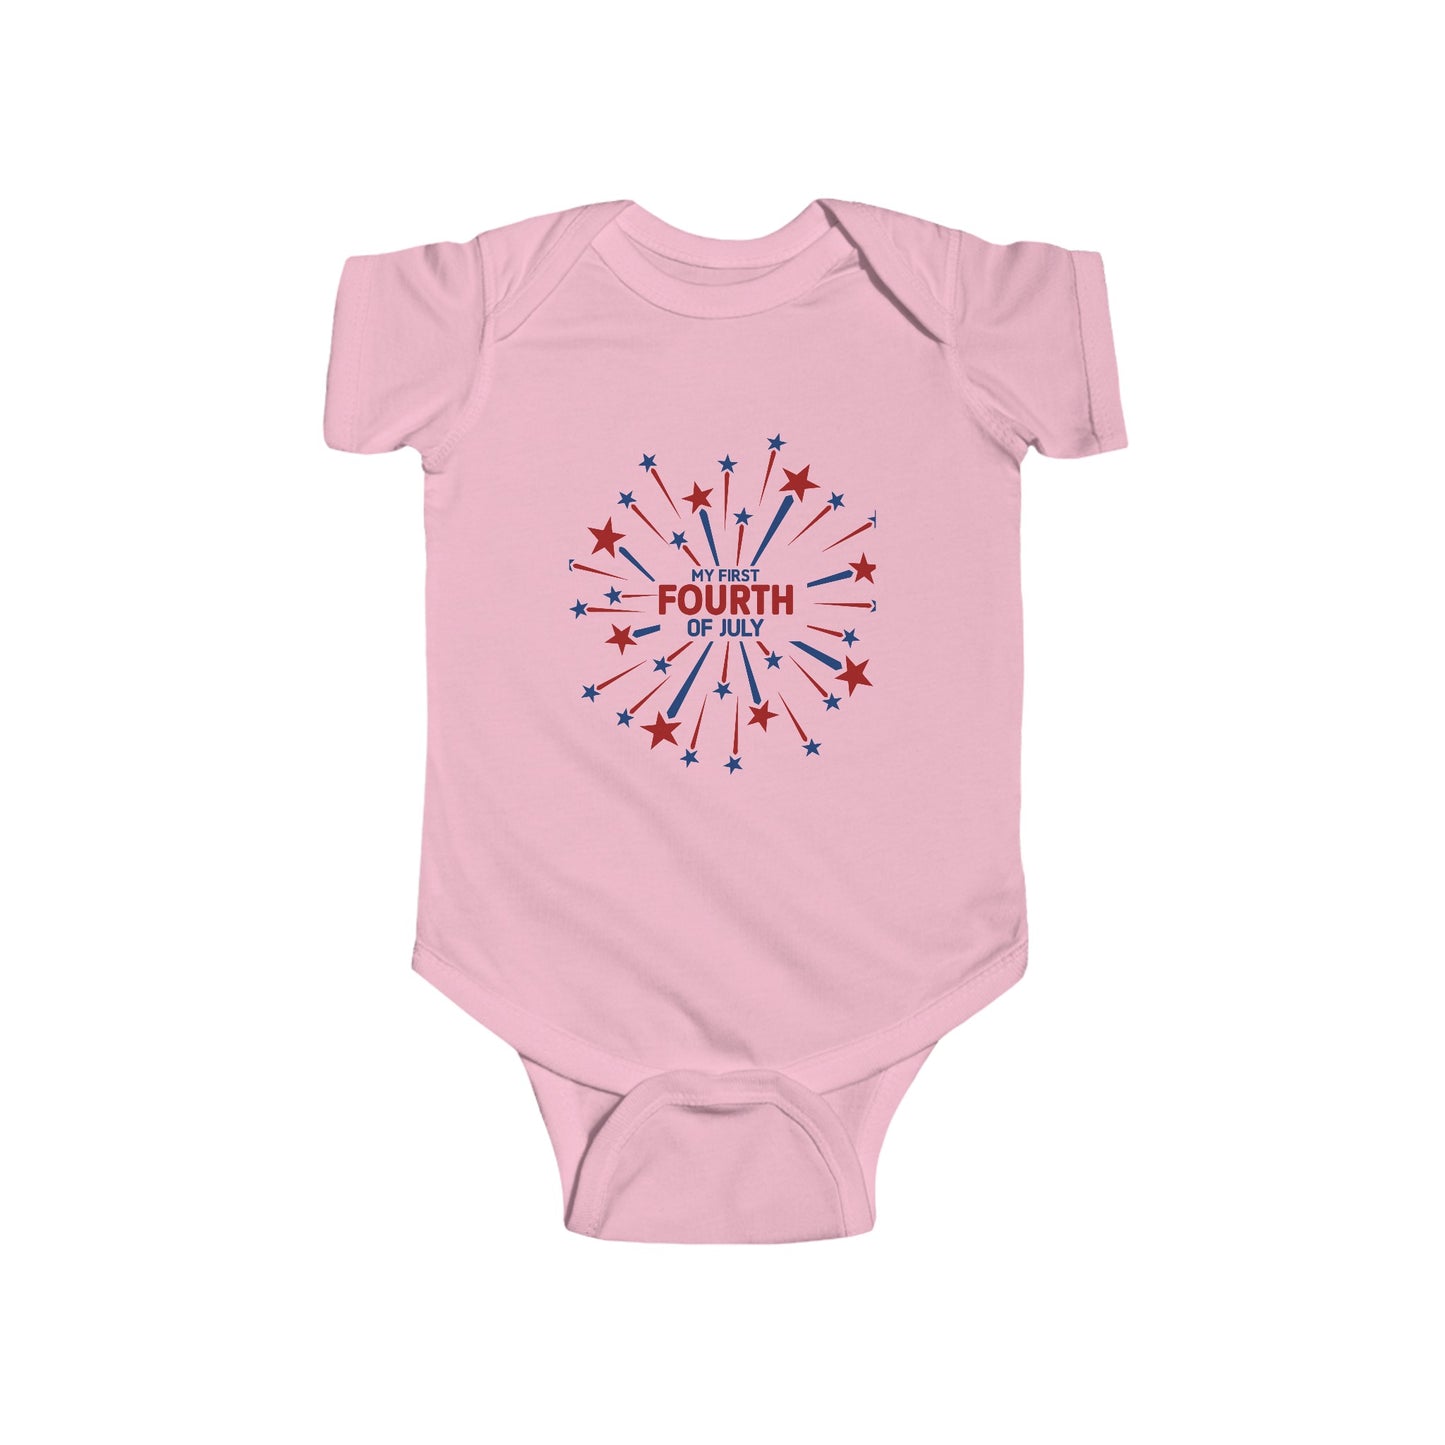 Get trendy with First Fourth Of July Onsie - Kids clothes available at Good Gift Company. Grab yours for $13.50 today!